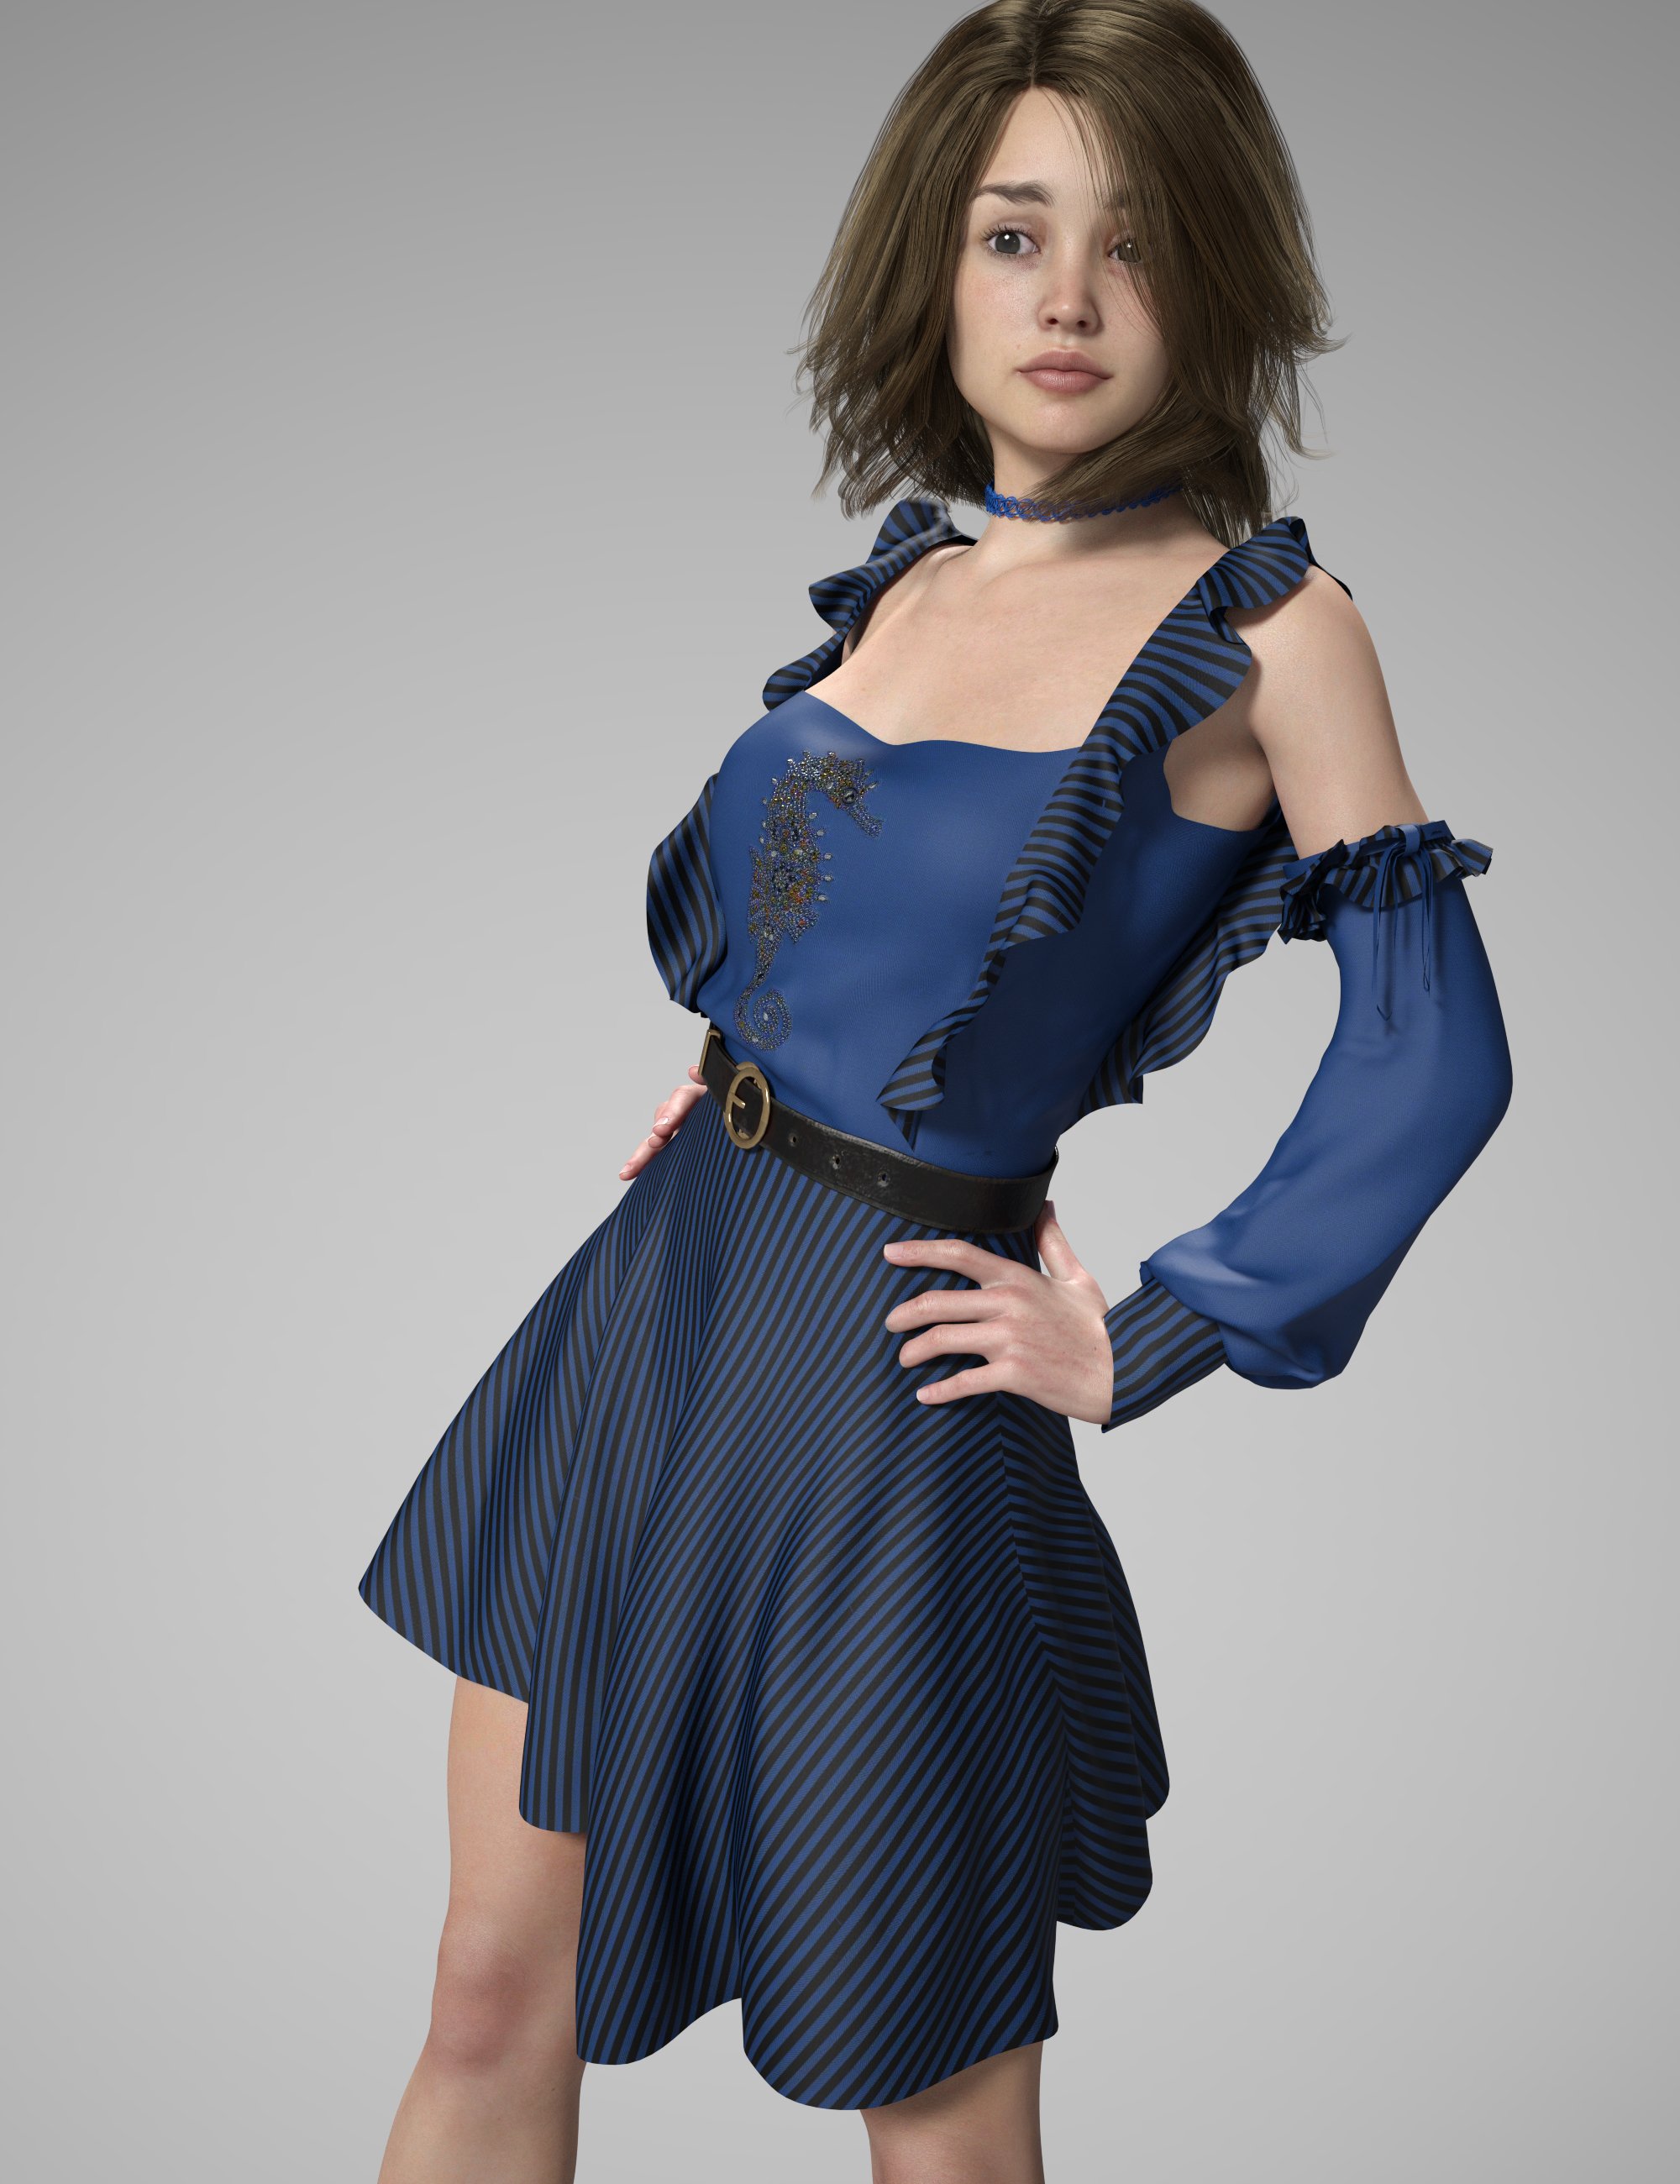 dForce Isabel Outfit Textures by: Moonscape GraphicsSade, 3D Models by Daz 3D